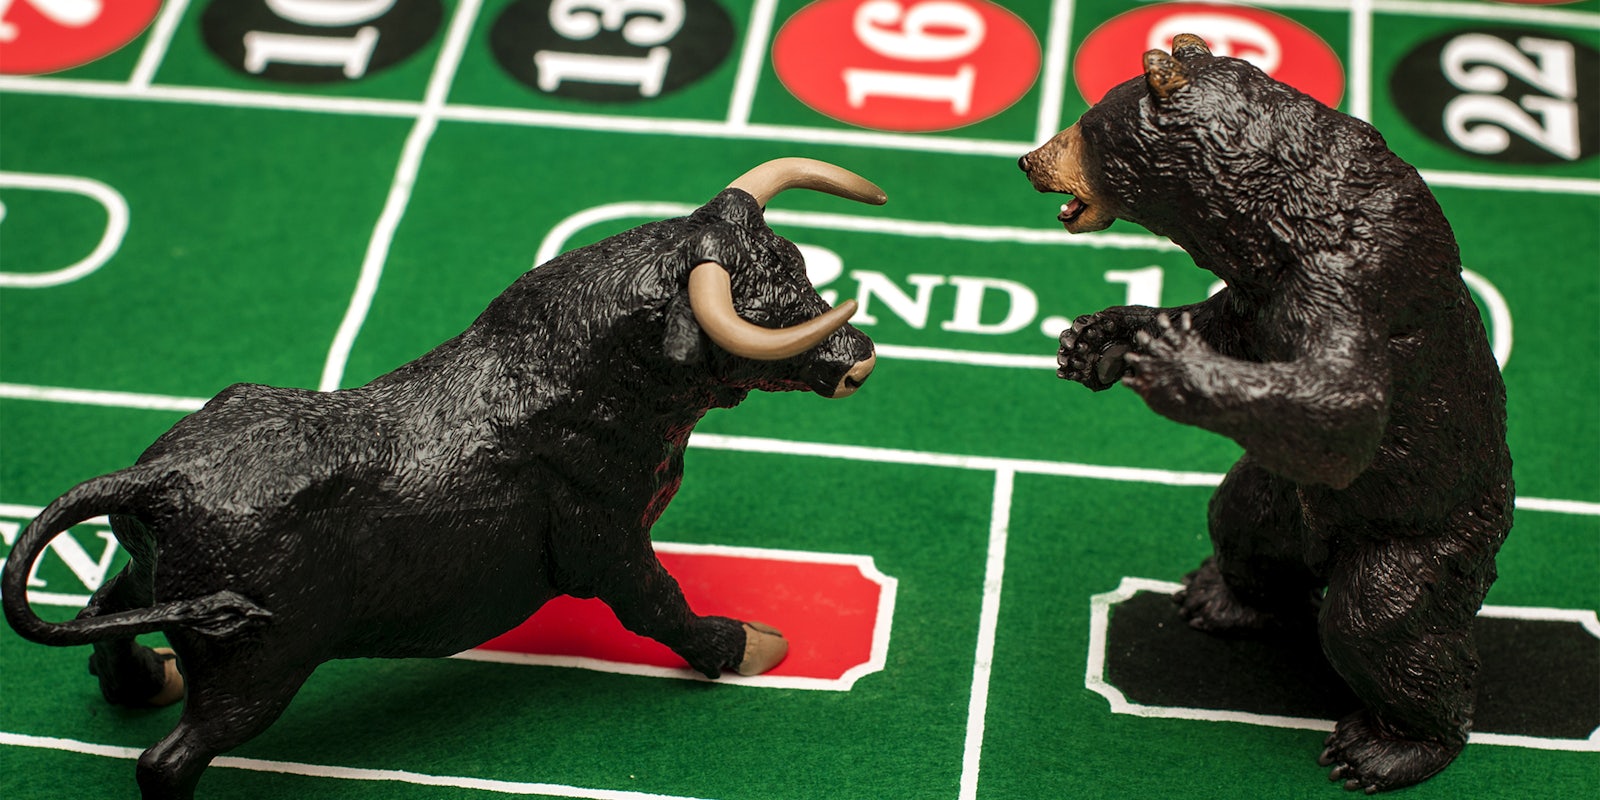 Bull and bear figurines on roulette table